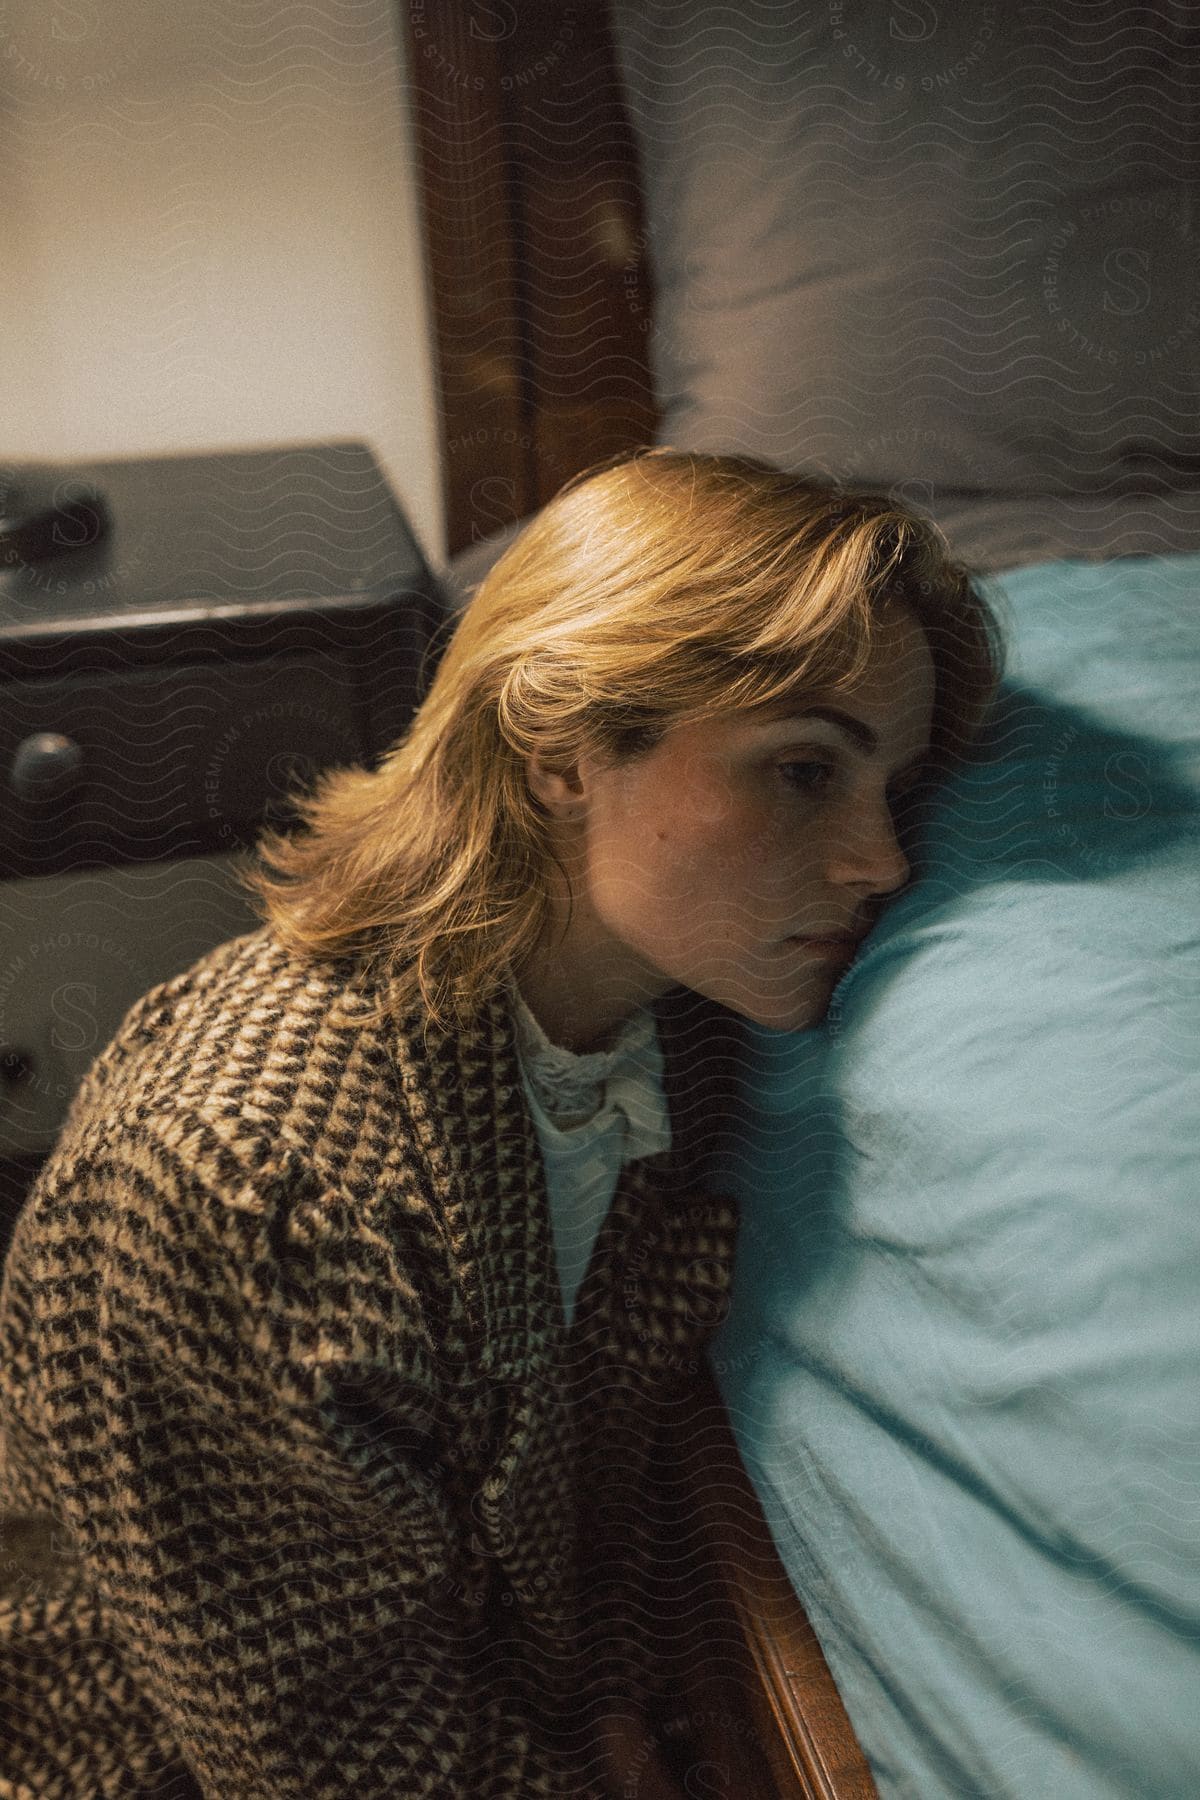 A blonde woman with sad facial expression sitting beside her bed.